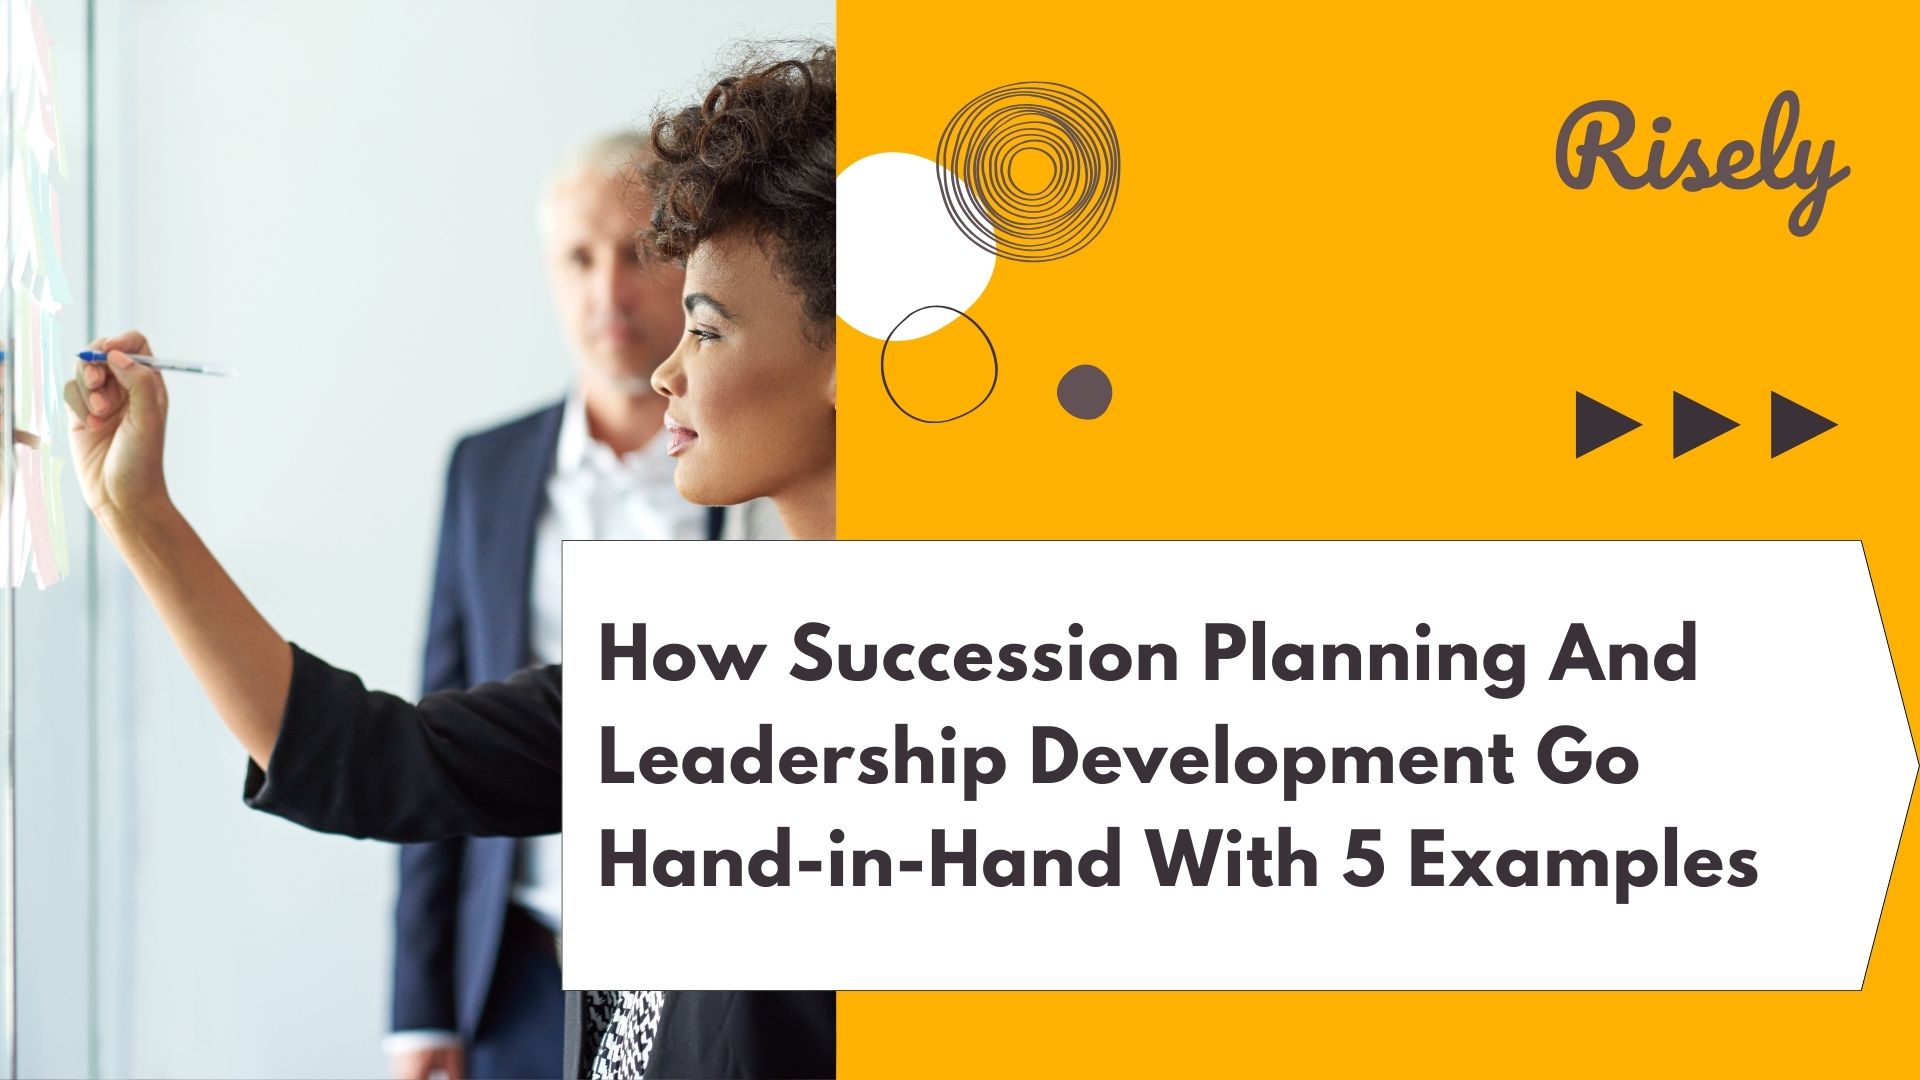 How Succession Planning And Leadership Development Go Hand-in-Hand With 5 Examples